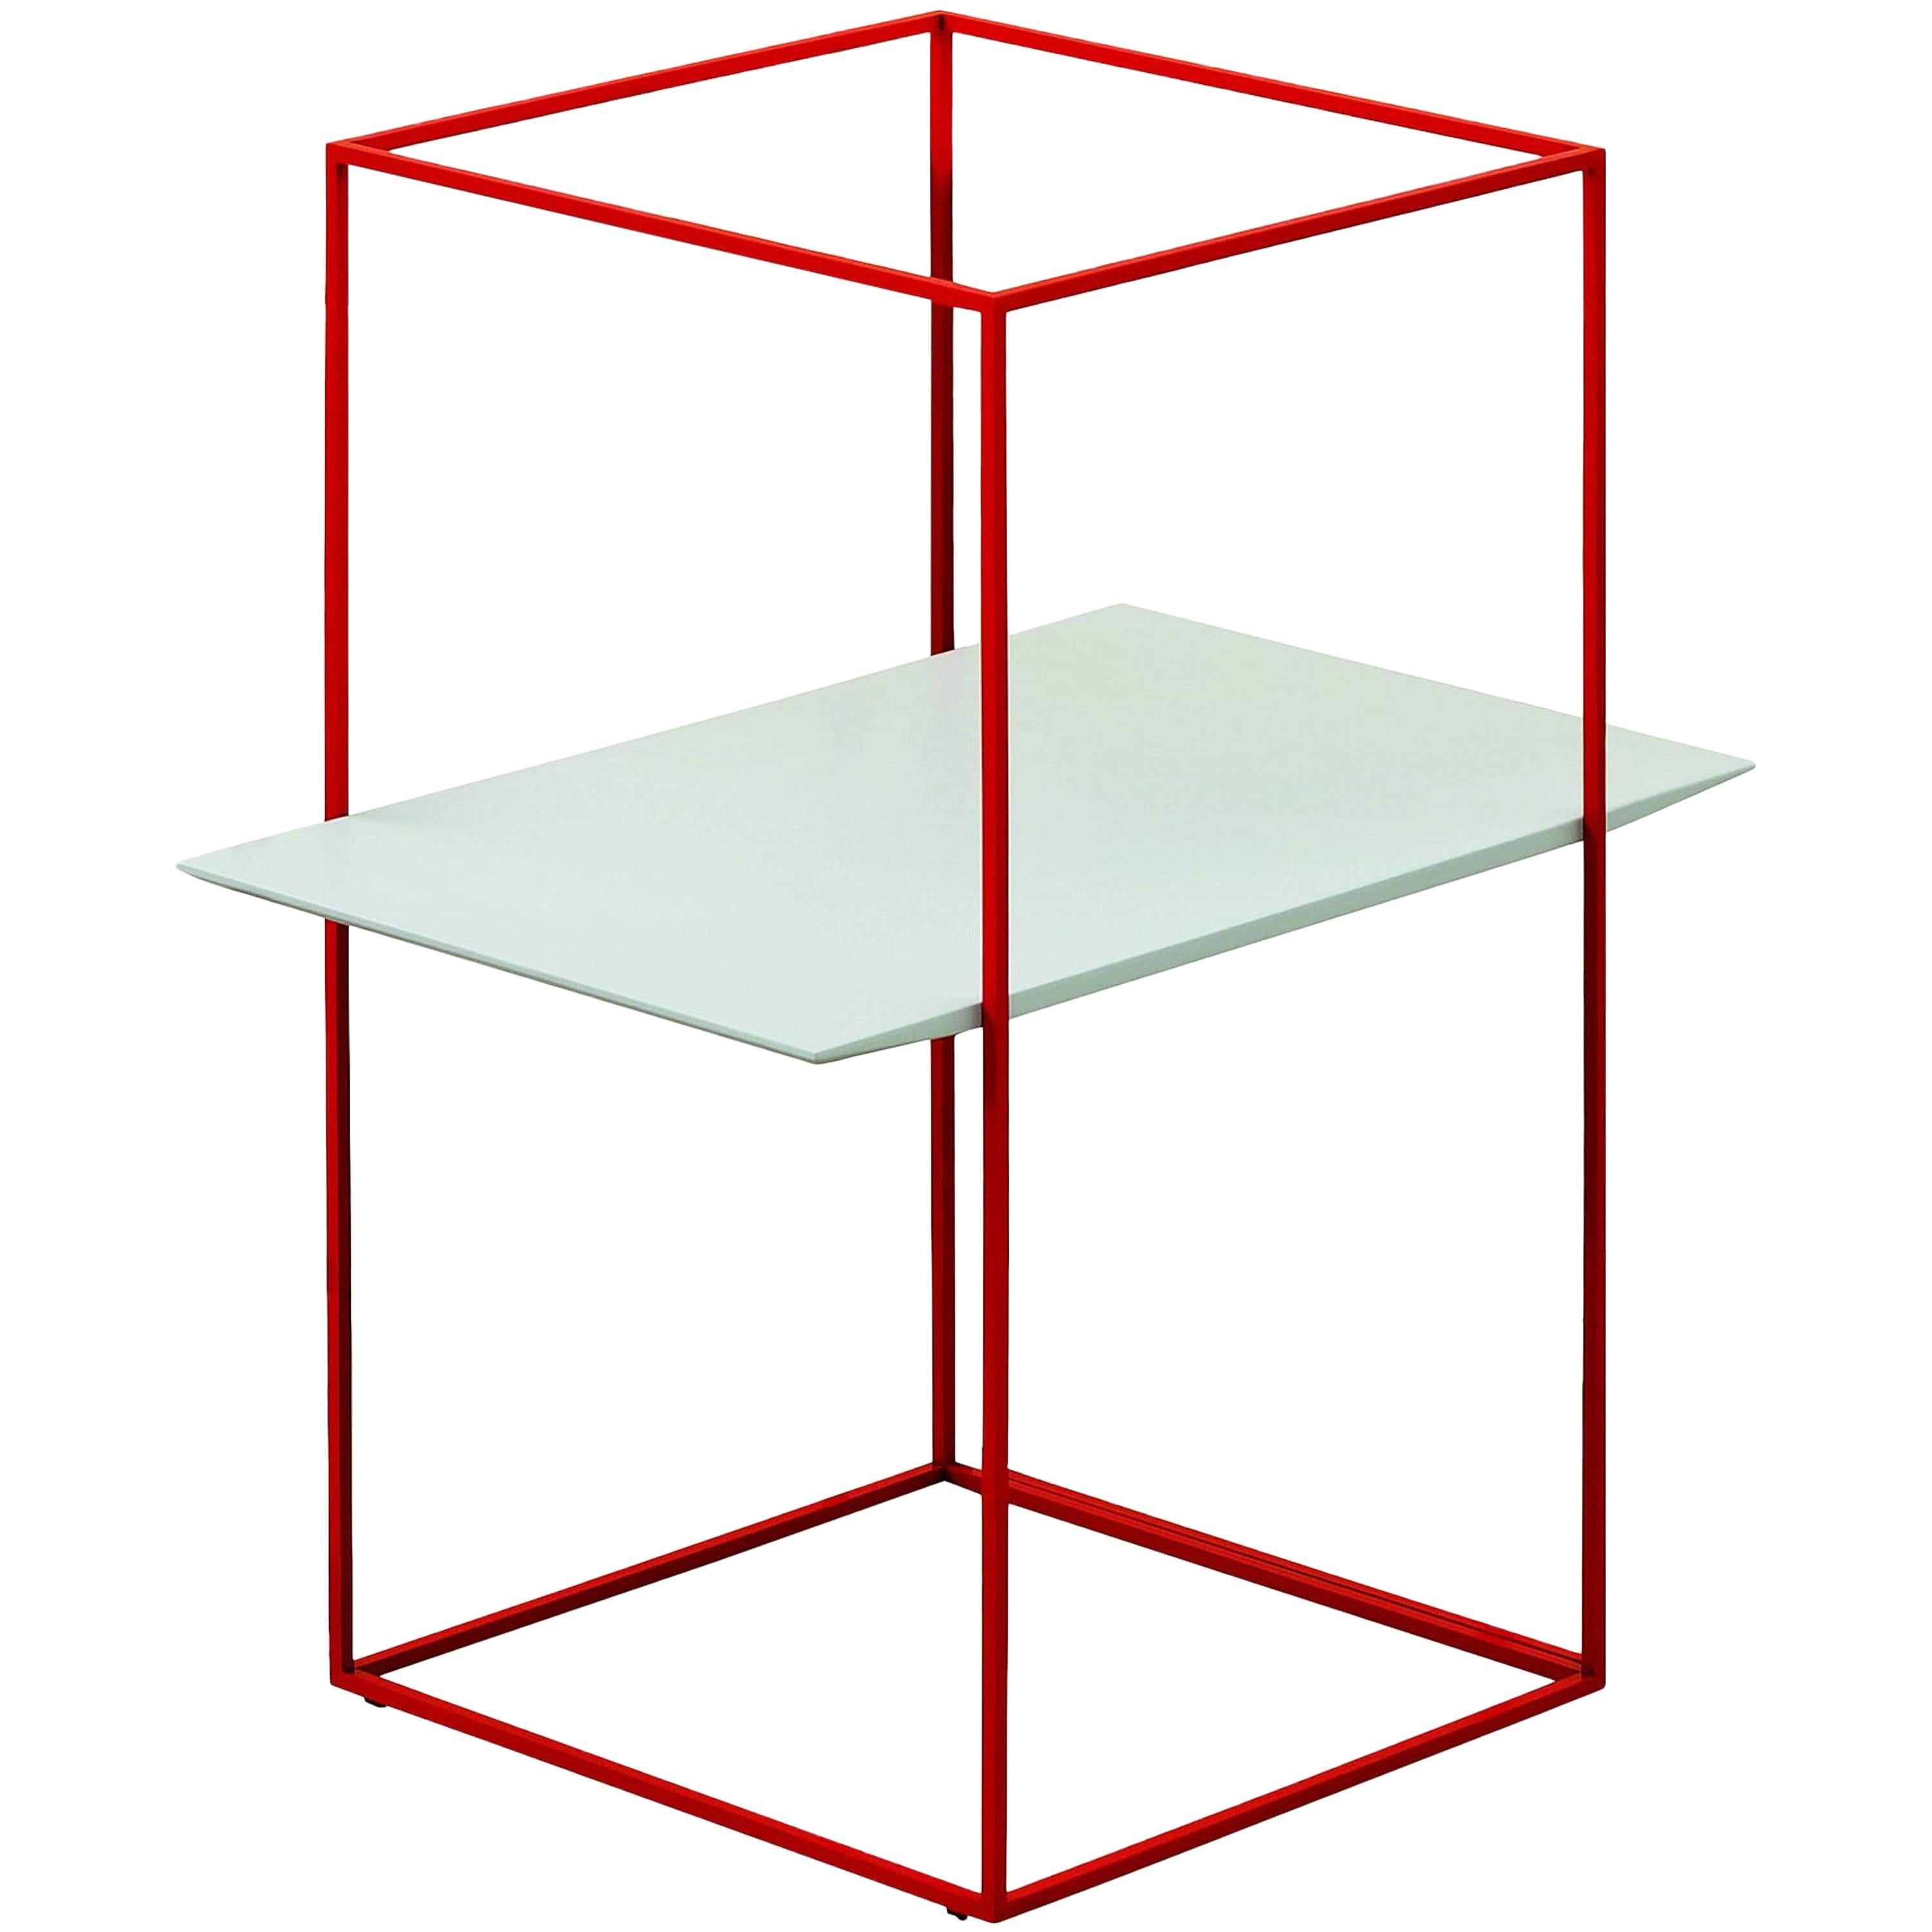 "TT" Side Table with One Rectangular Tray Designed by Ron Gilad for Adele-C